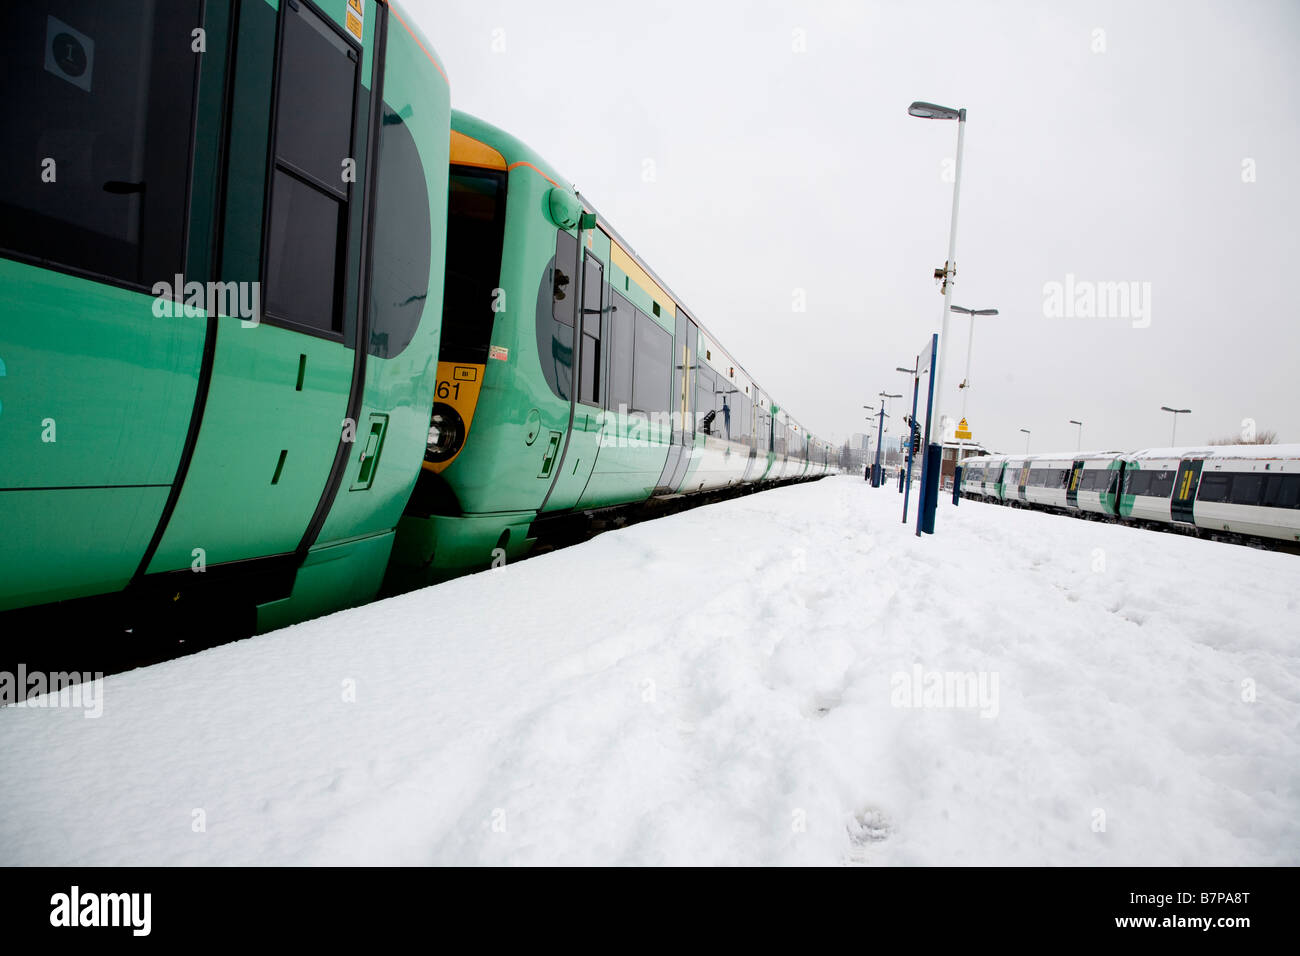 Snow And Train At Clapham Junction Station Feb 2009 Stock Photo